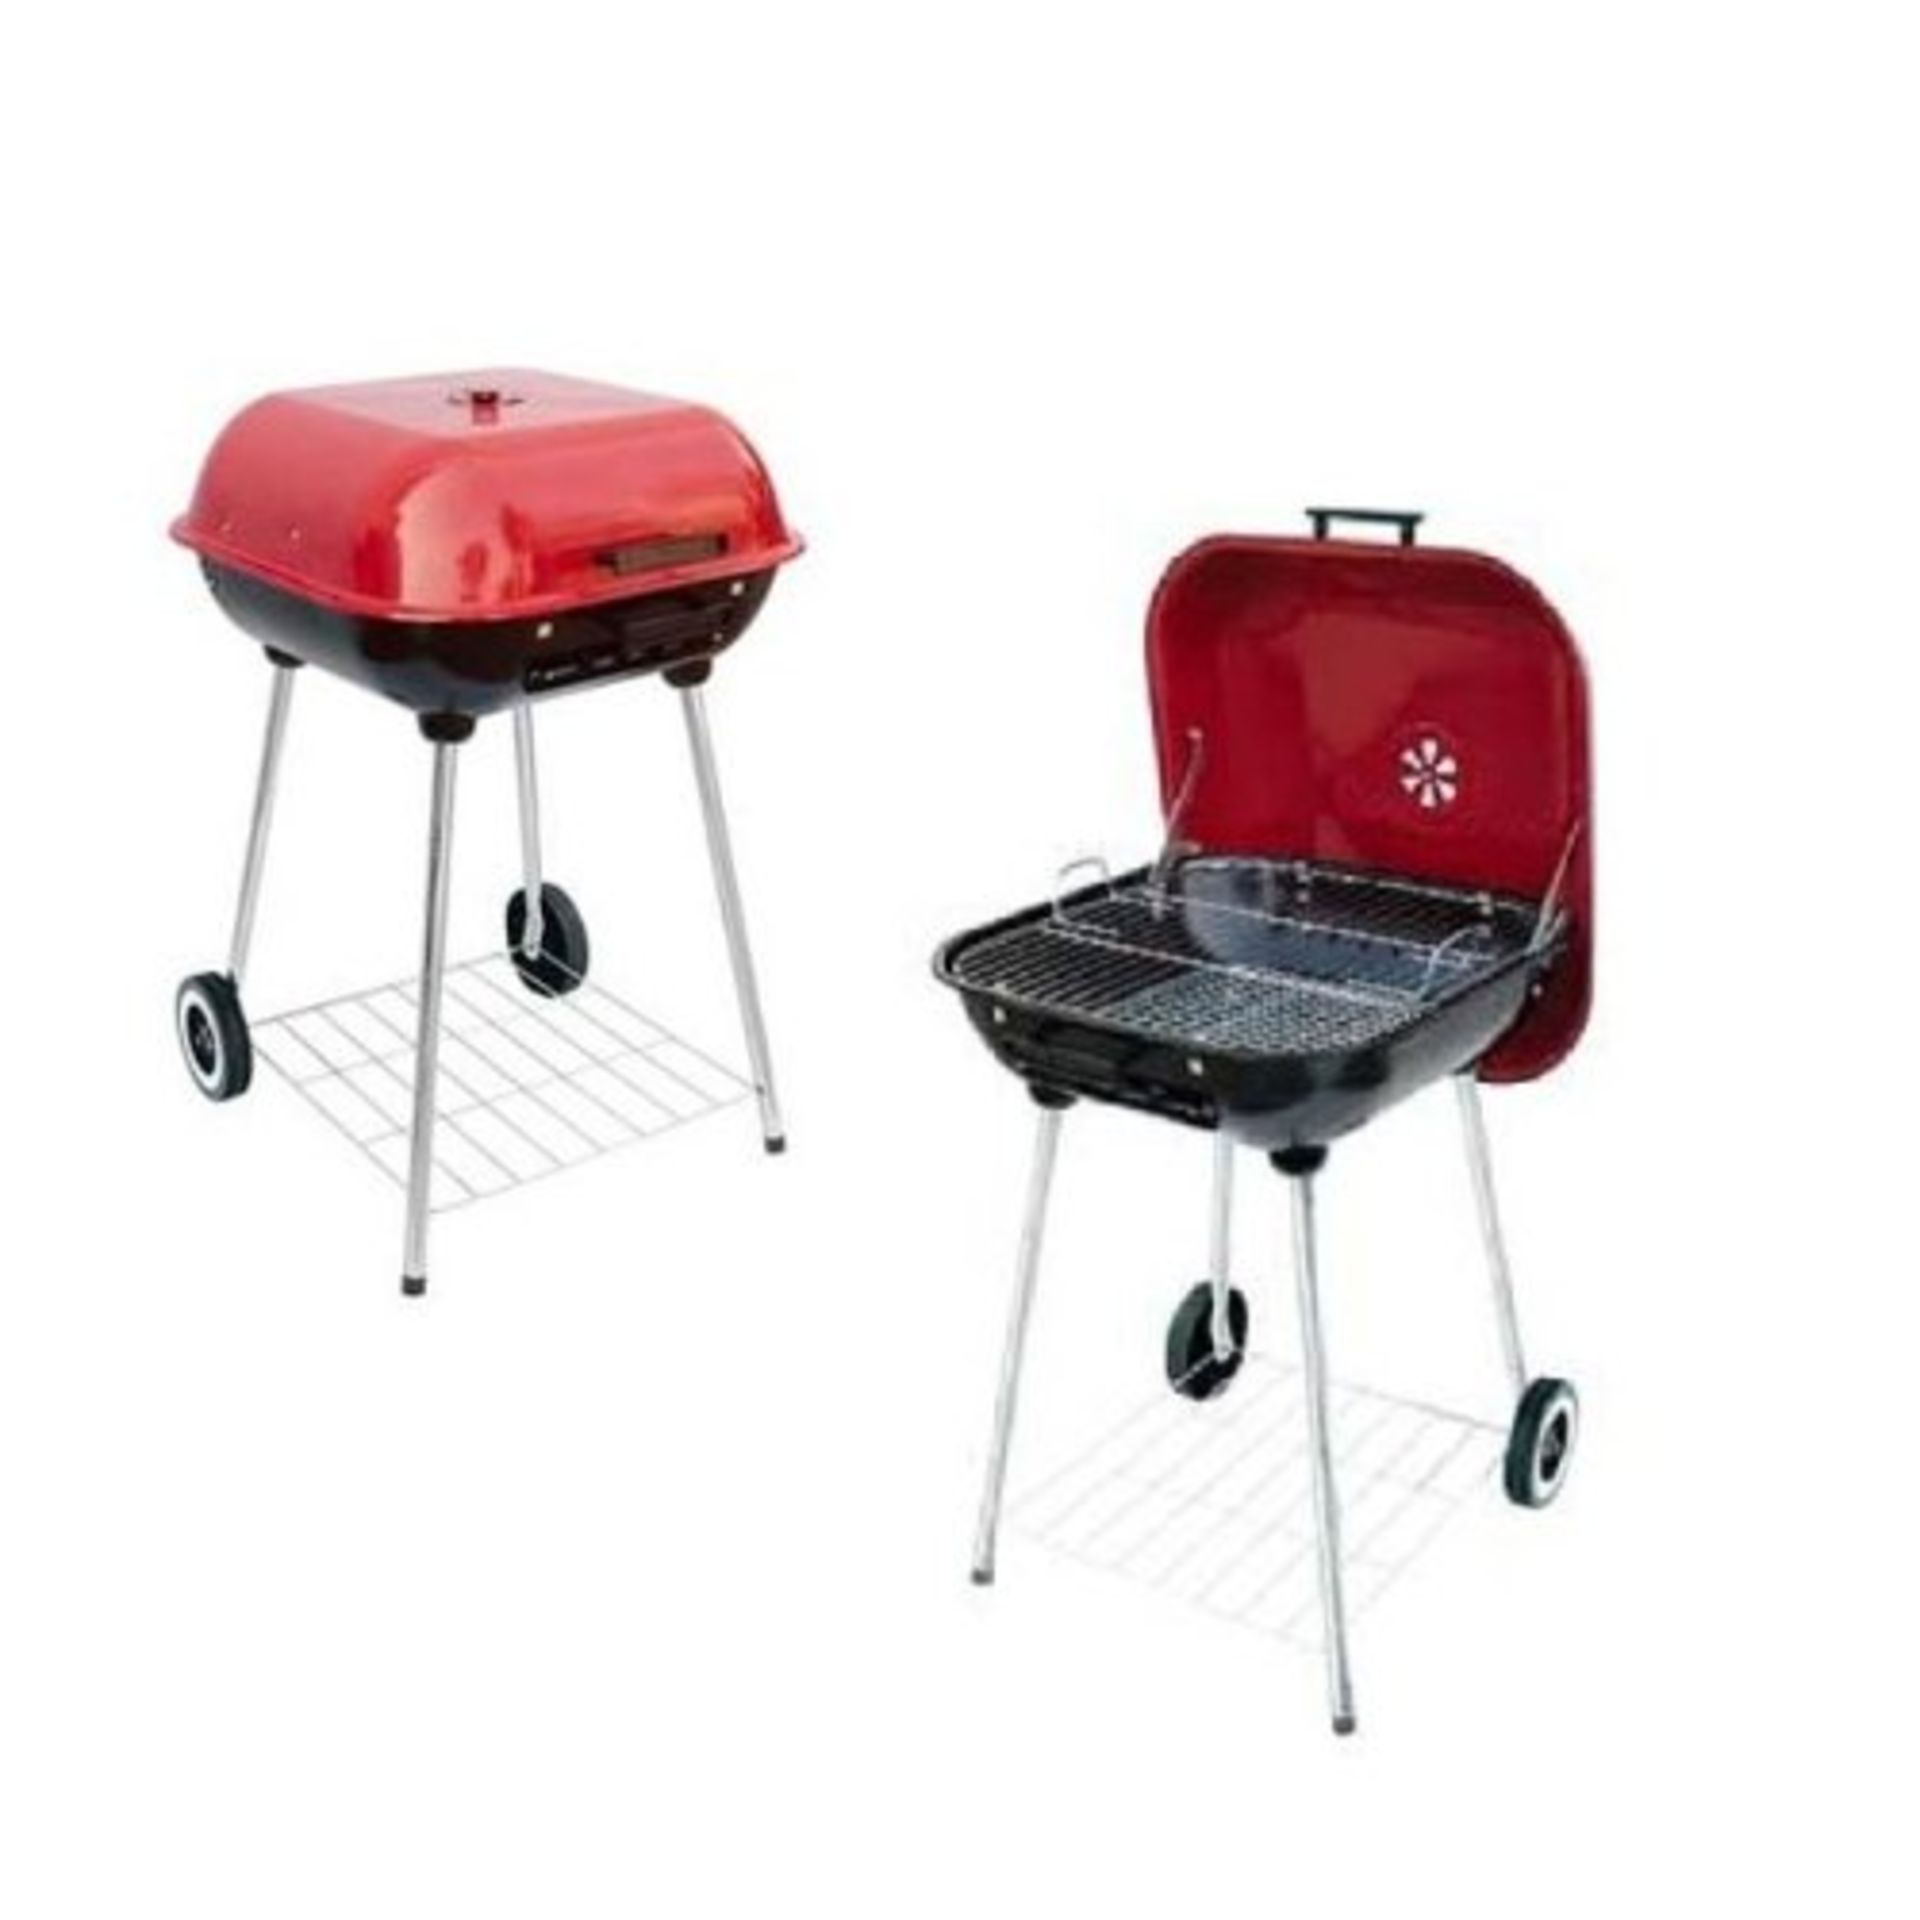 V Brand New Mastercook 54cm Stainless Steel Charcoal Barbecue With Red Top